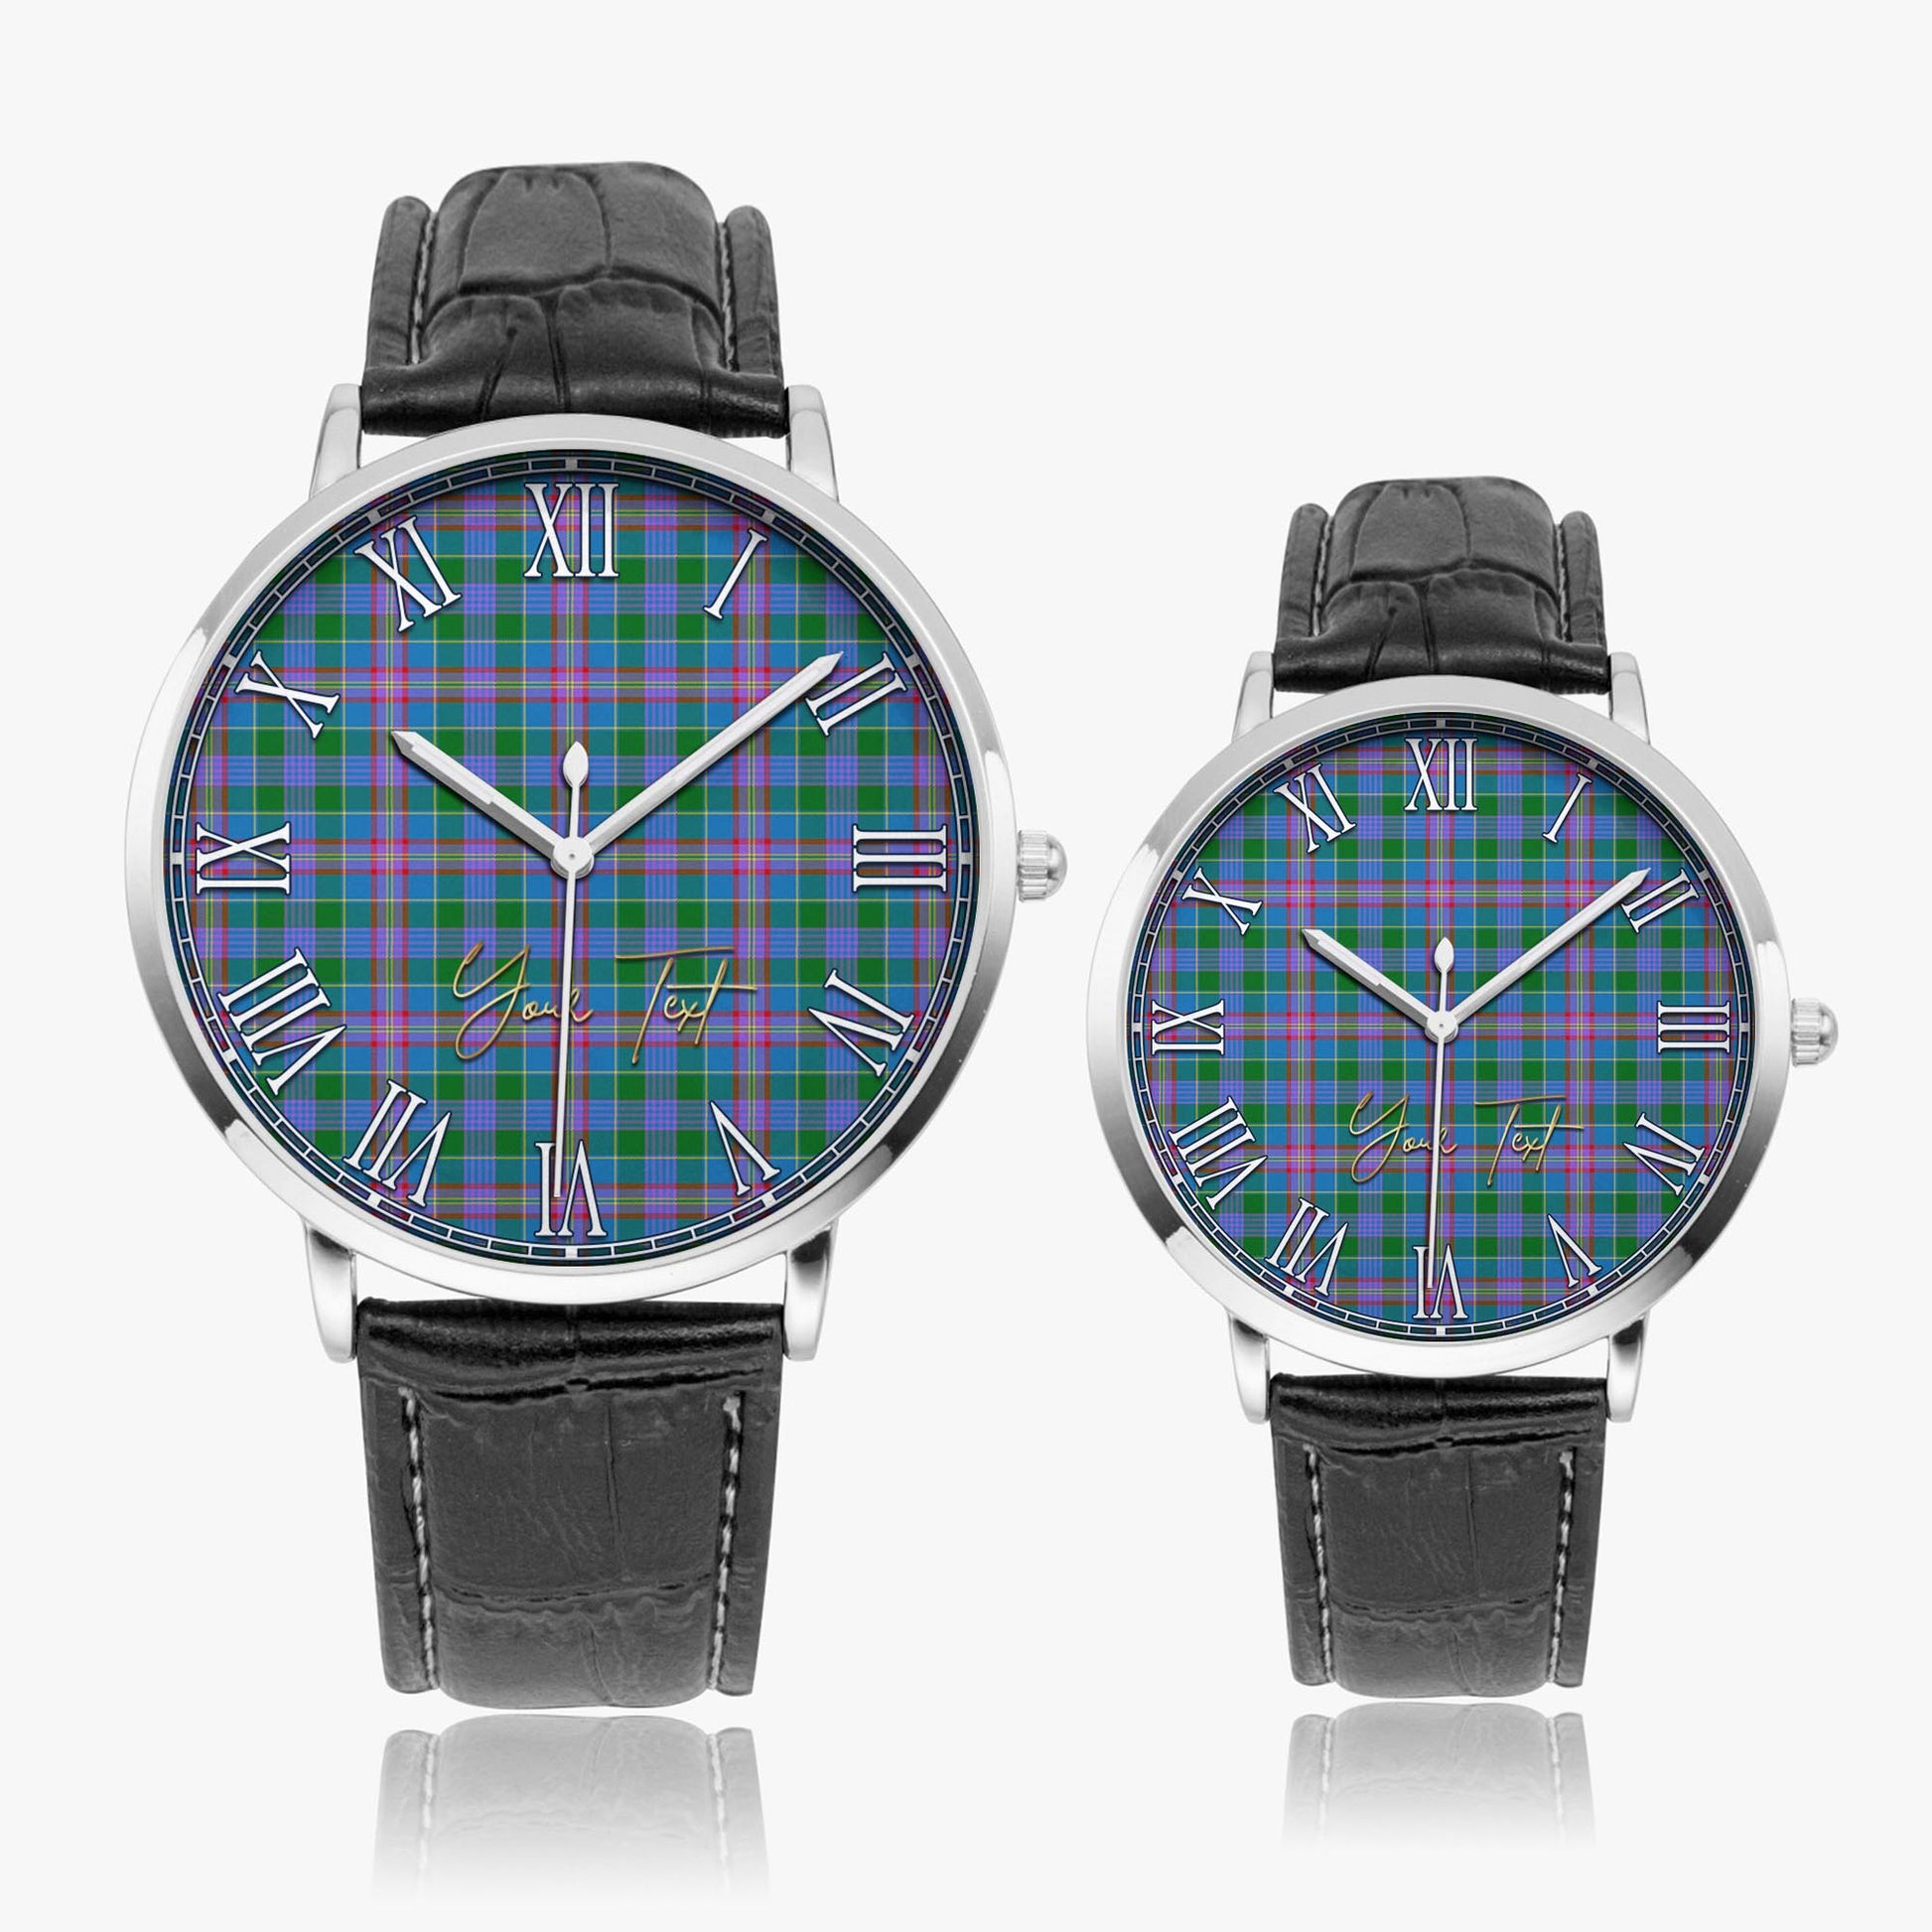 Ralston Tartan Personalized Your Text Leather Trap Quartz Watch Ultra Thin Silver Case With Black Leather Strap - Tartanvibesclothing